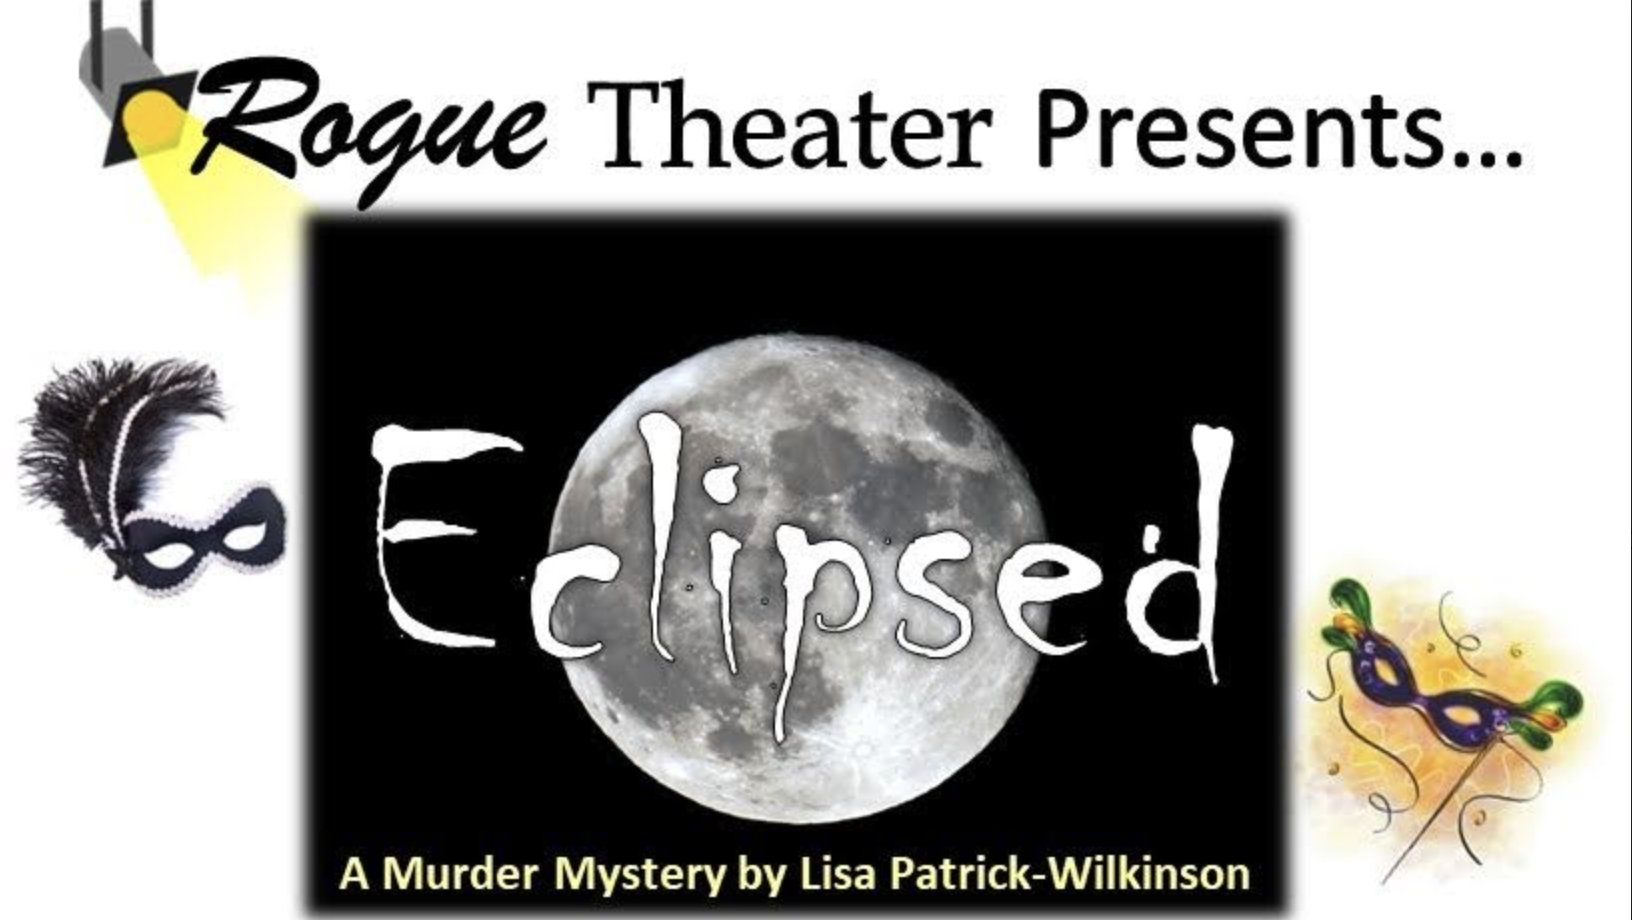 “Eclipsed” - A Murder Mystery